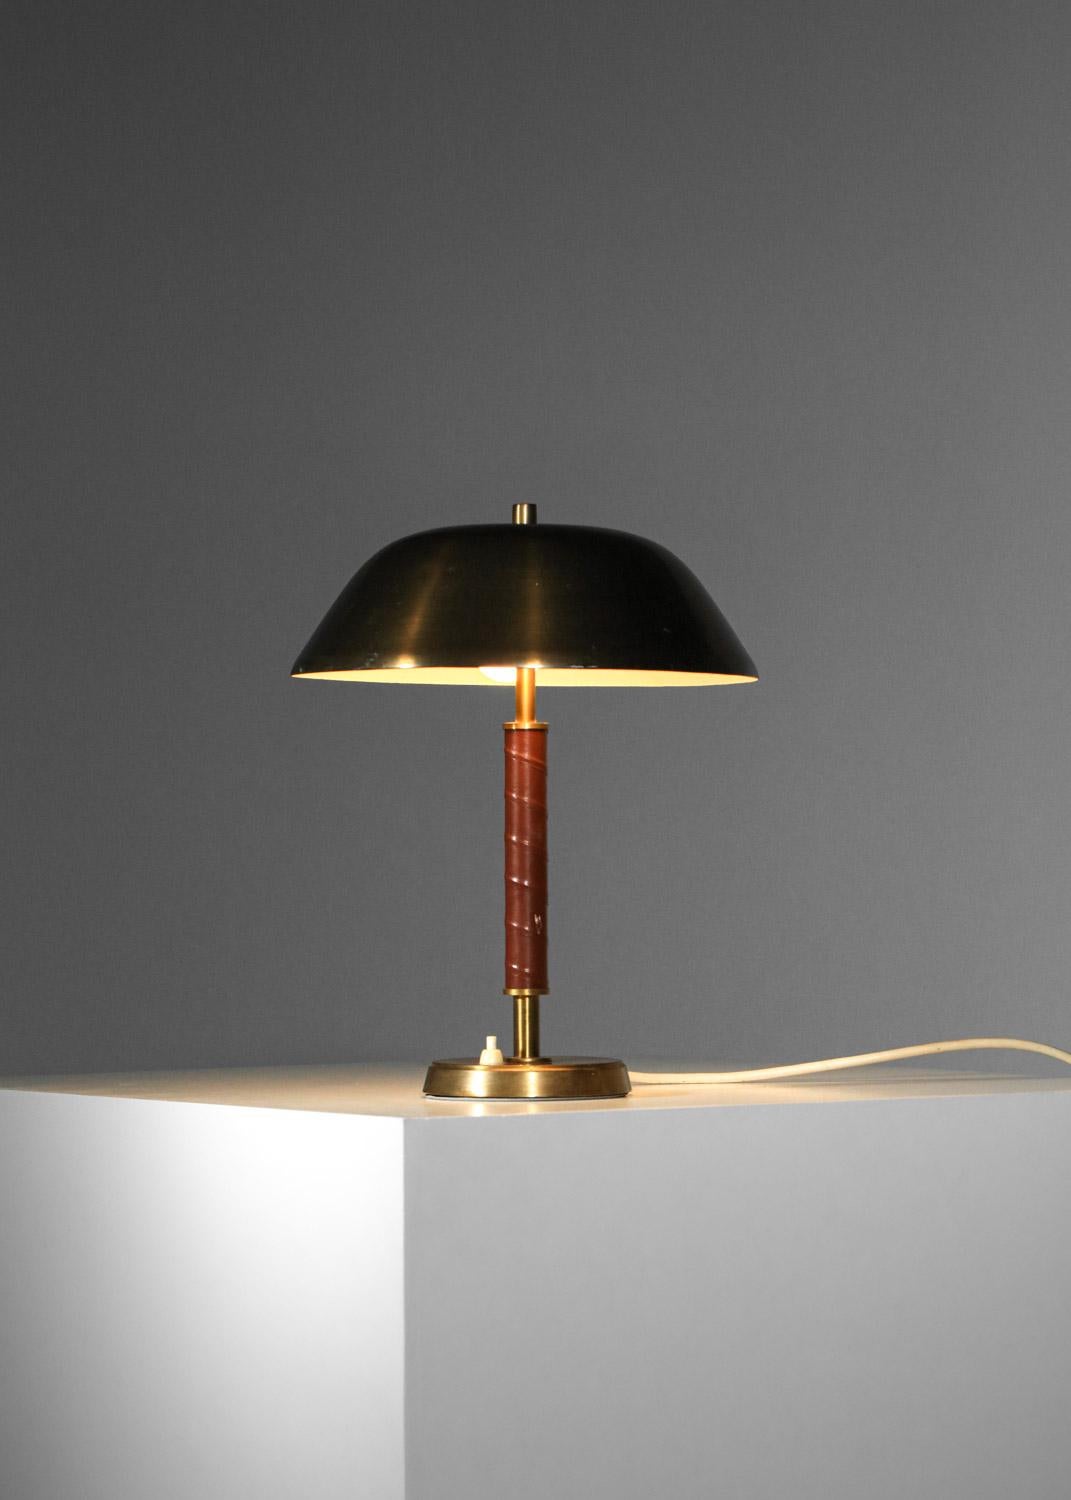 Scandinavian desk lamp from the 60s. Solid brass structure and shade. Central bar wrapped in brown leather. Beautiful vintage condition, with traces of oxidation and age on the brass (see photos). Original electrical system? we recommend two B22